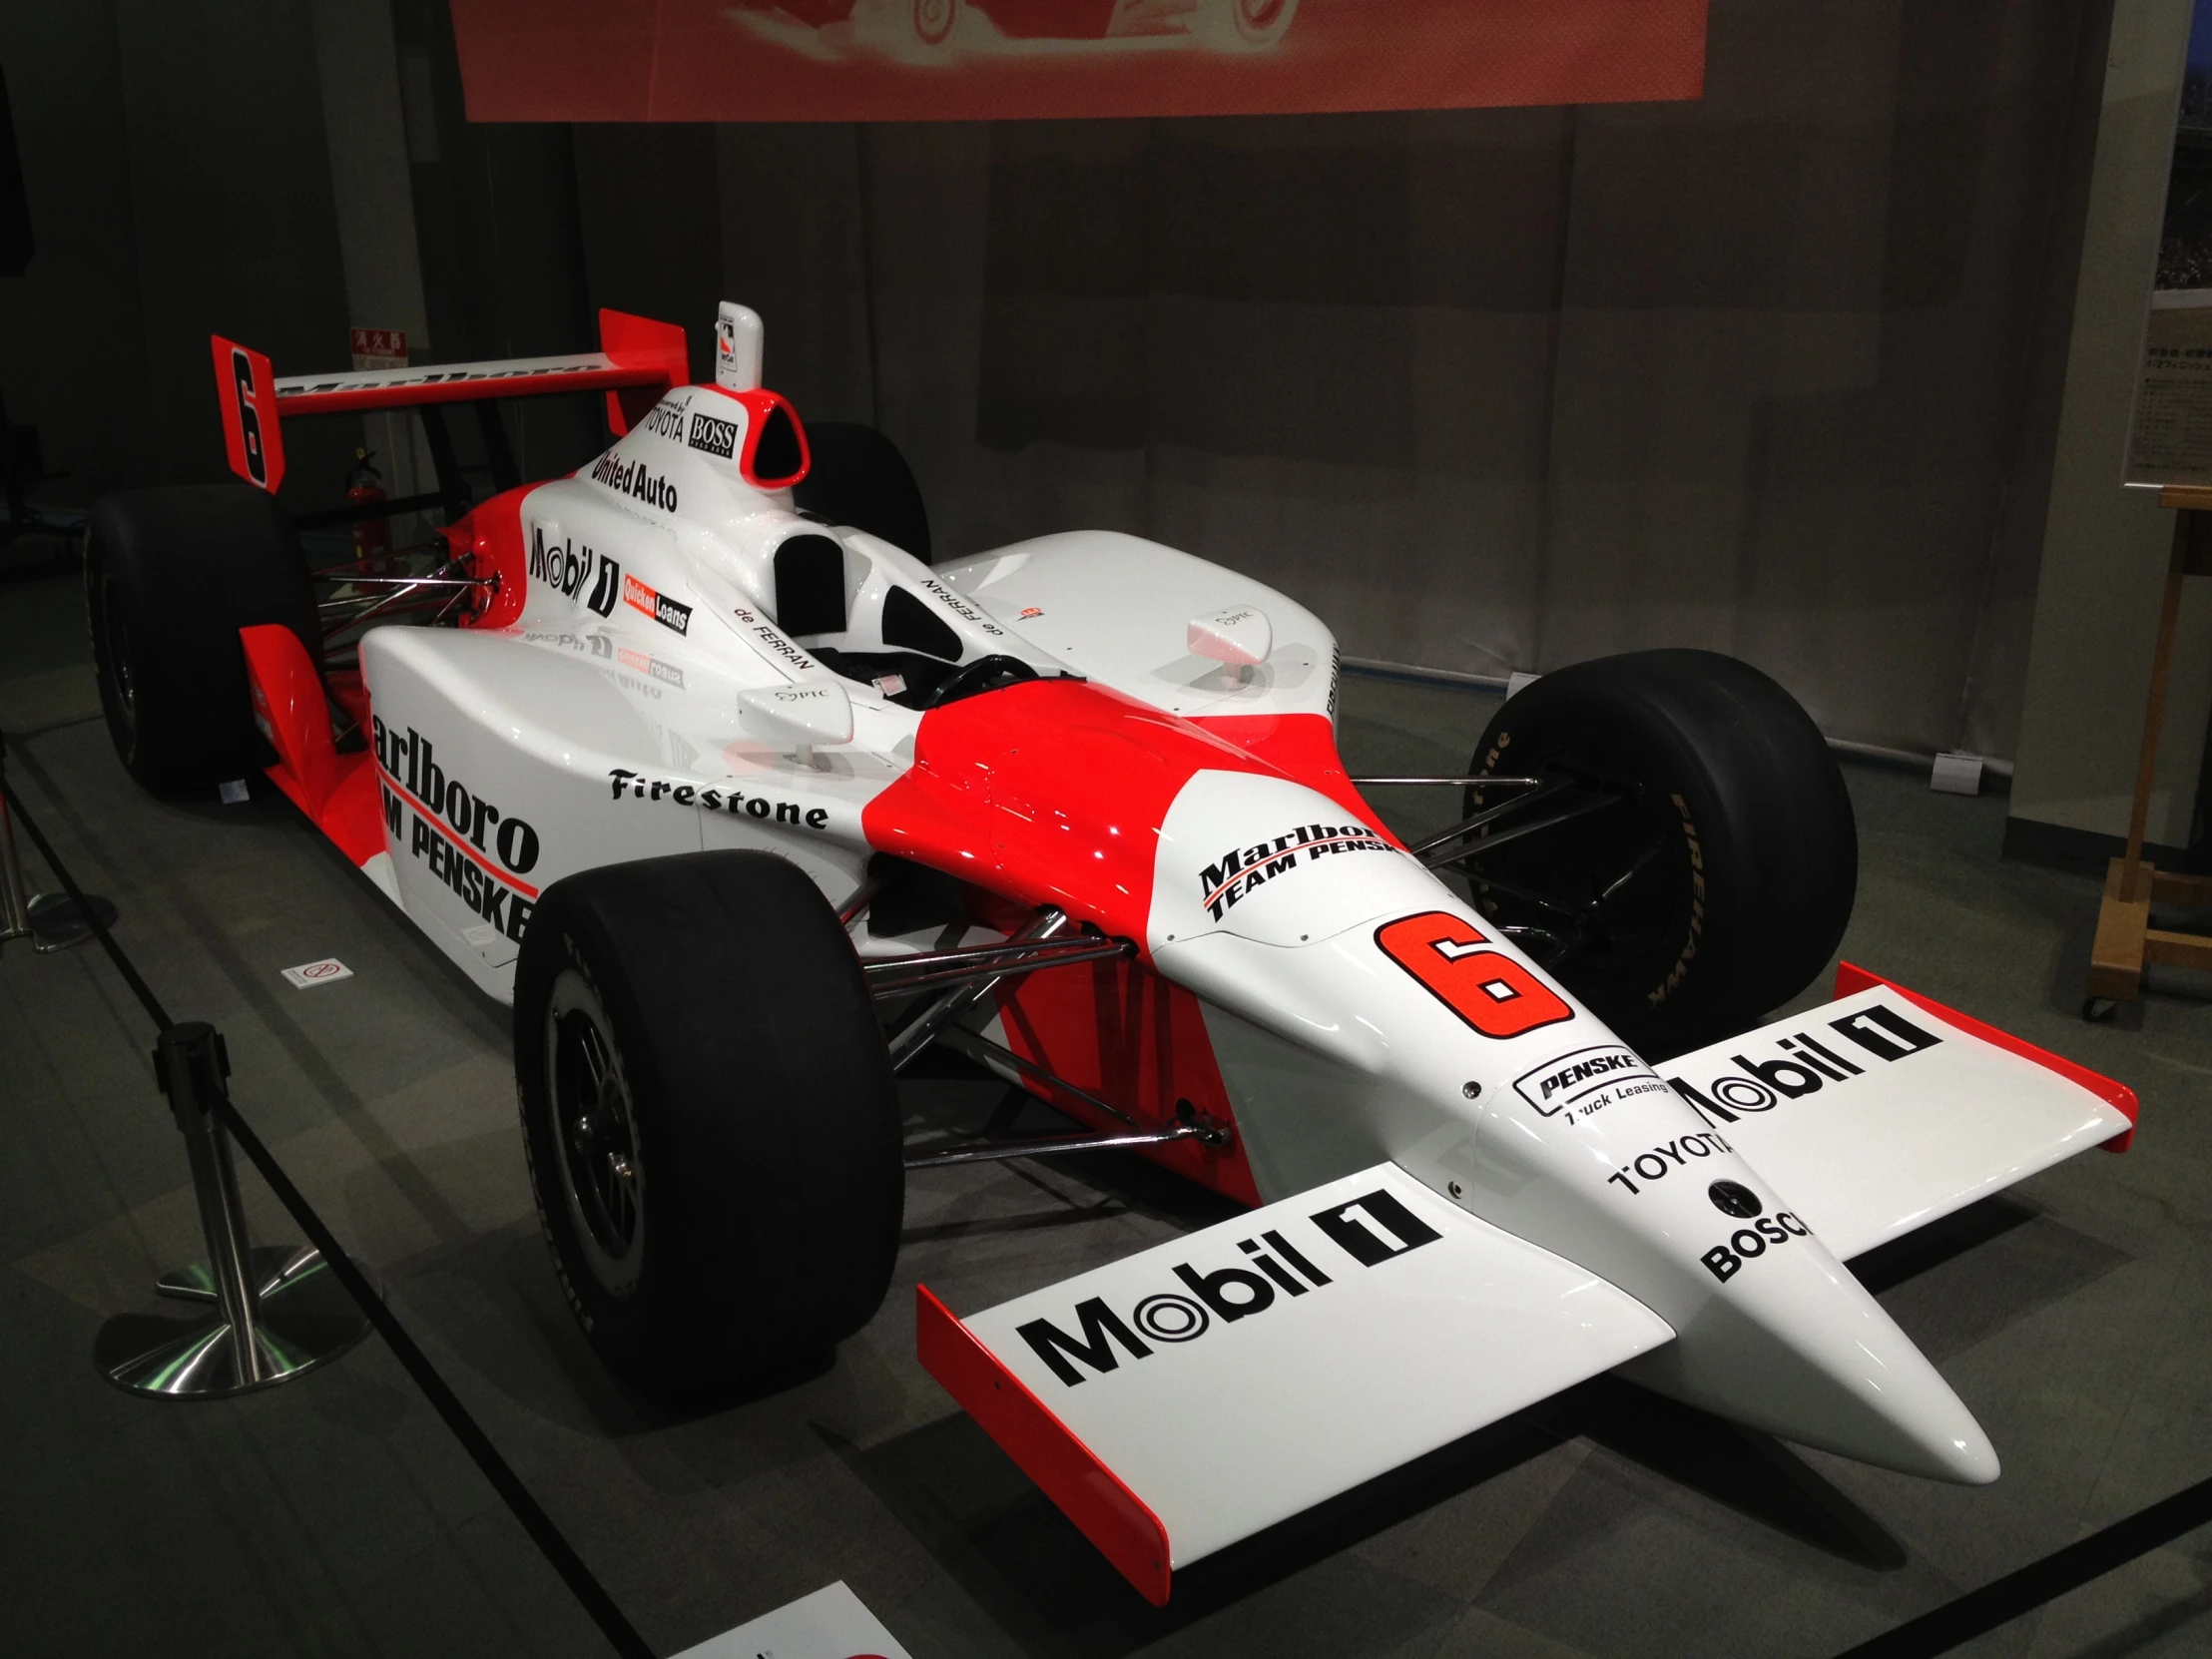 the front of a racing car is shown on display